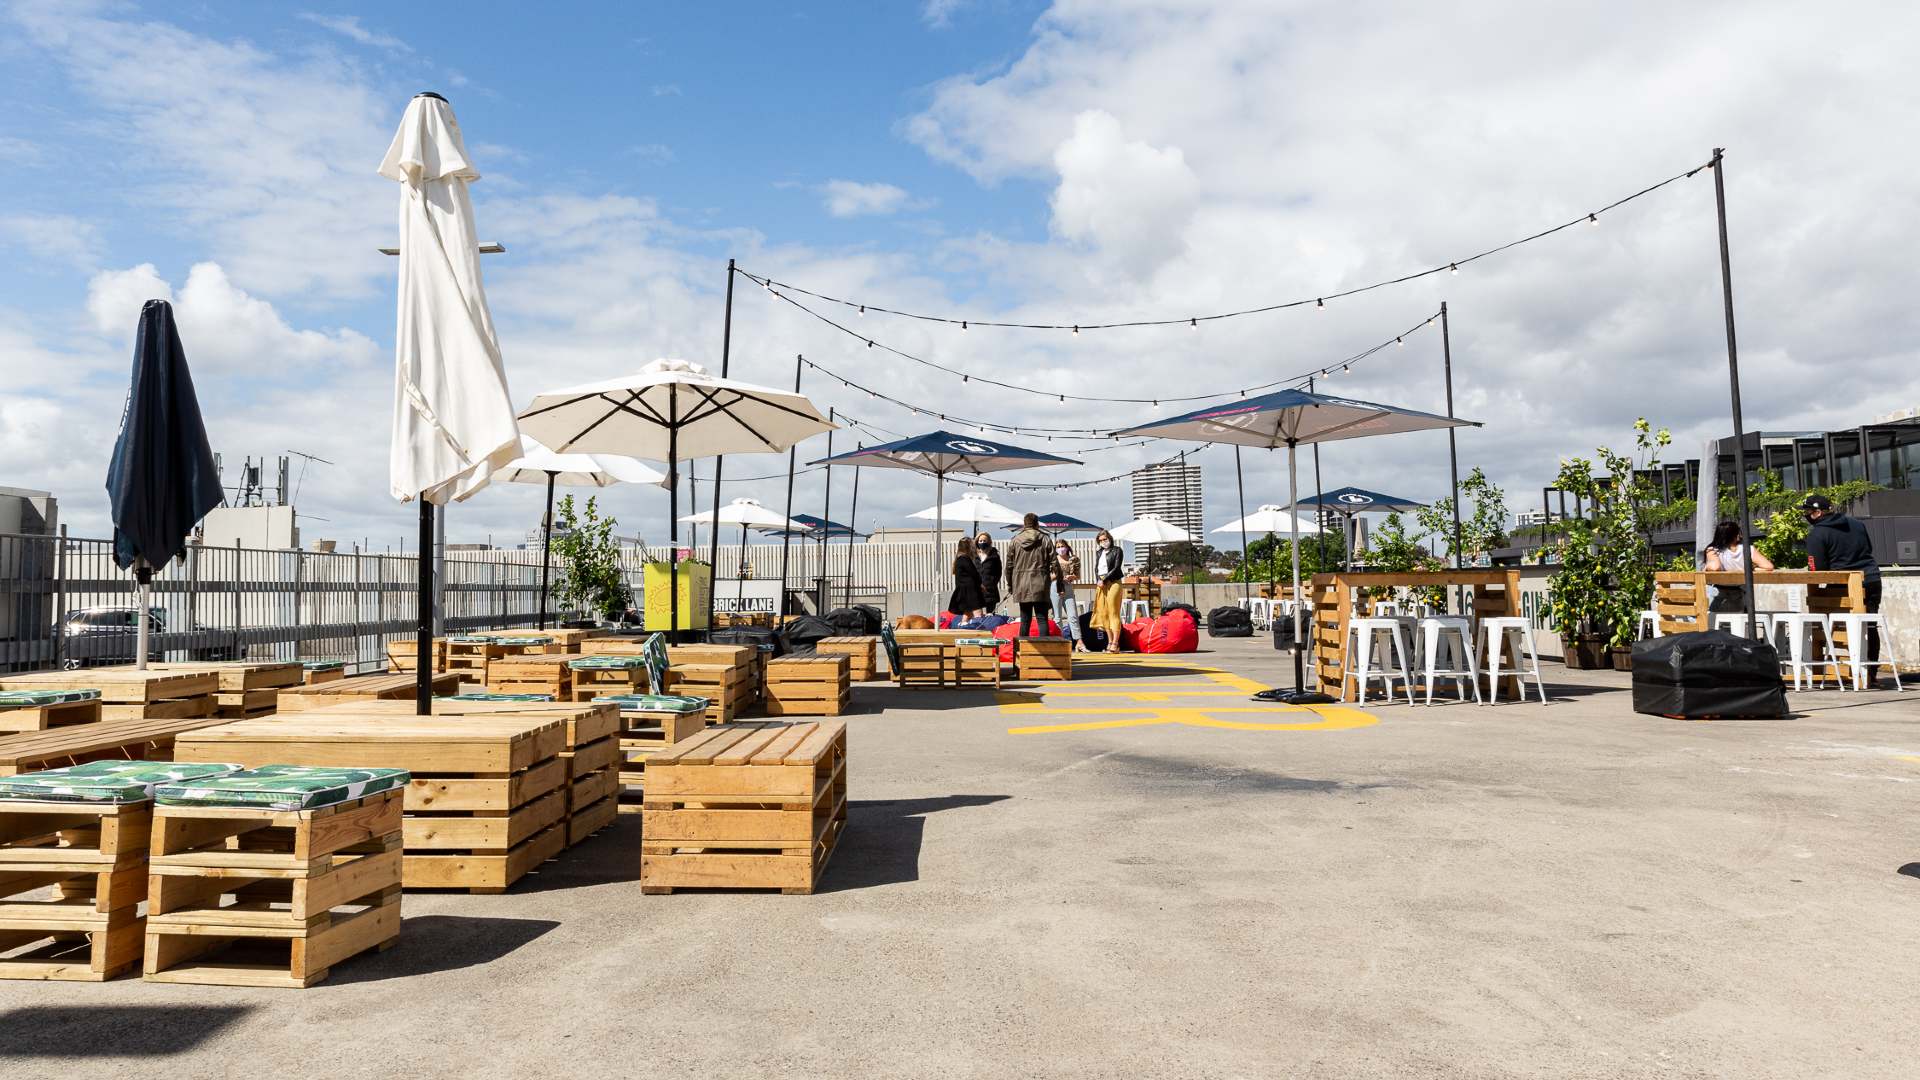 An Openair Beer Garden Has Landed on the Rooftop of The Prince Hotel's Car Park